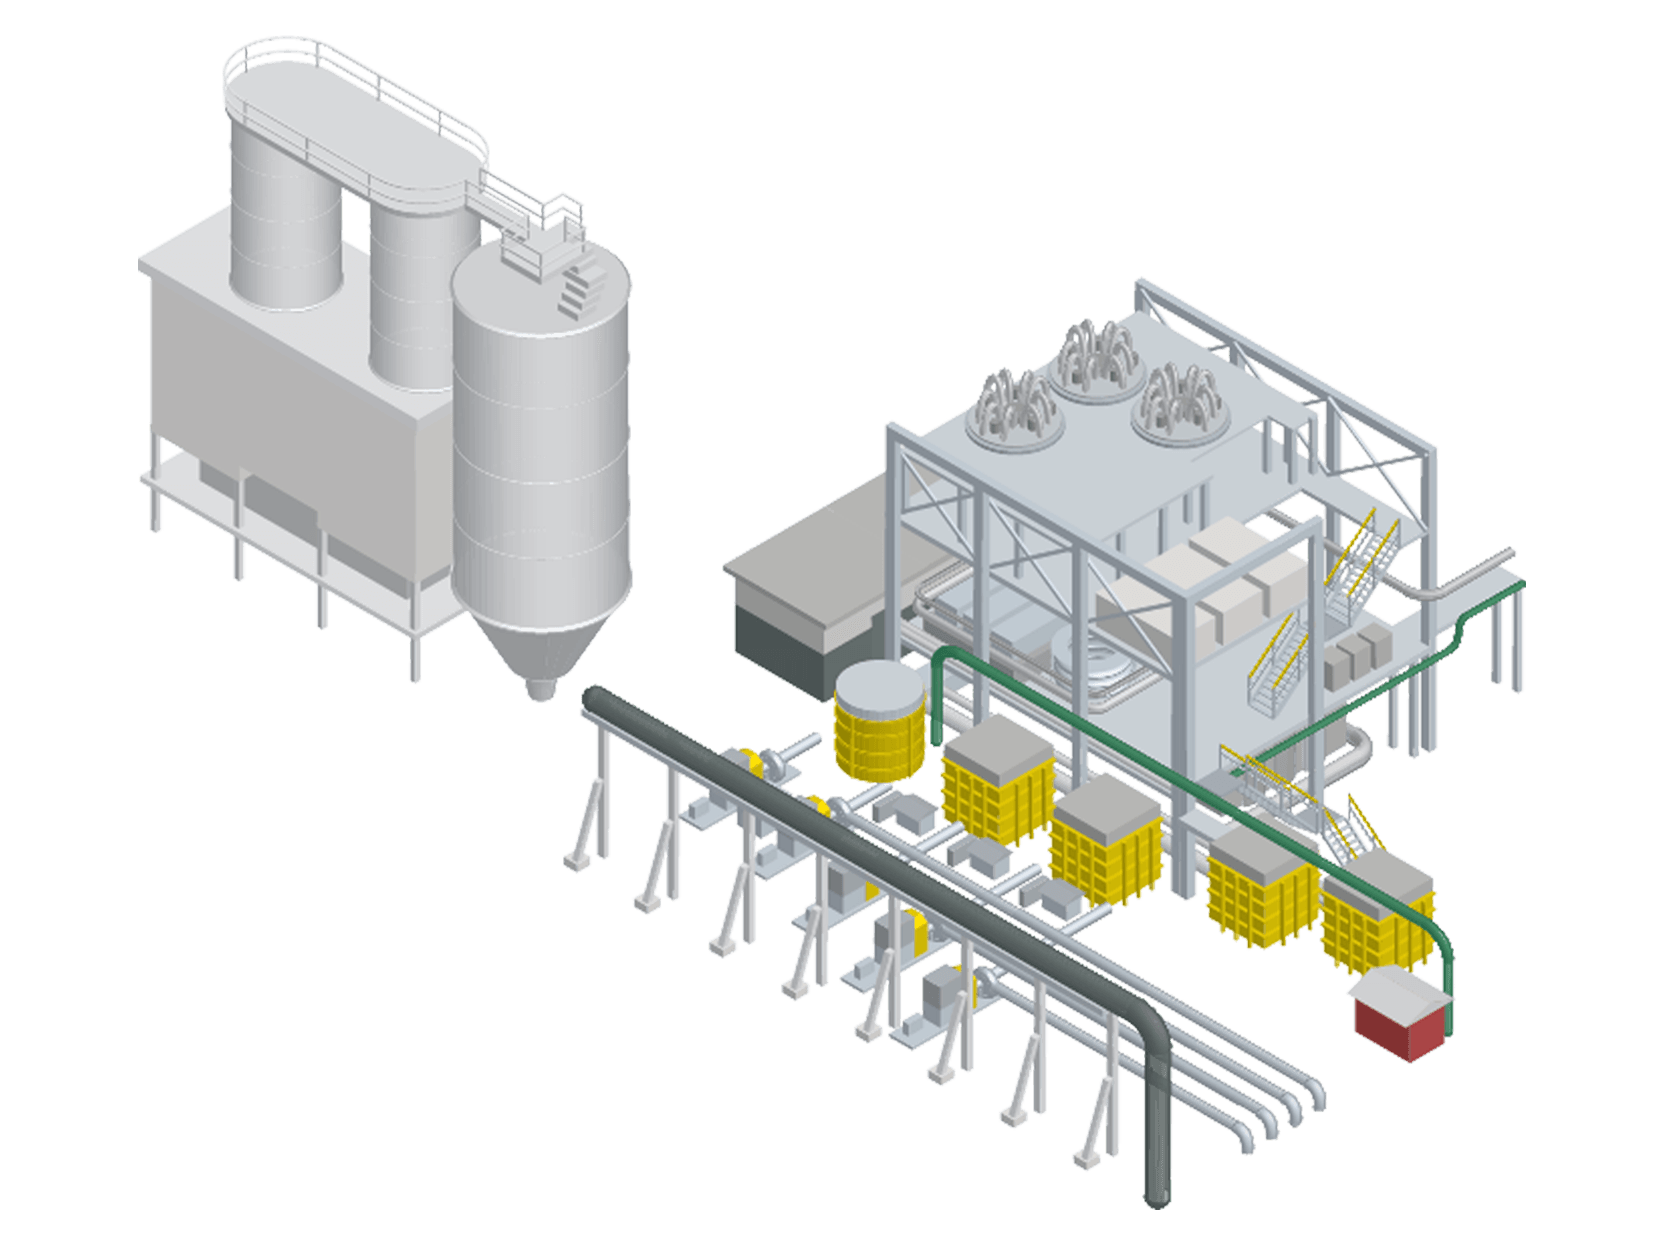 A 3d rendering of the wetfill plant at the Mount Isa Mining site in Queensland, Australia